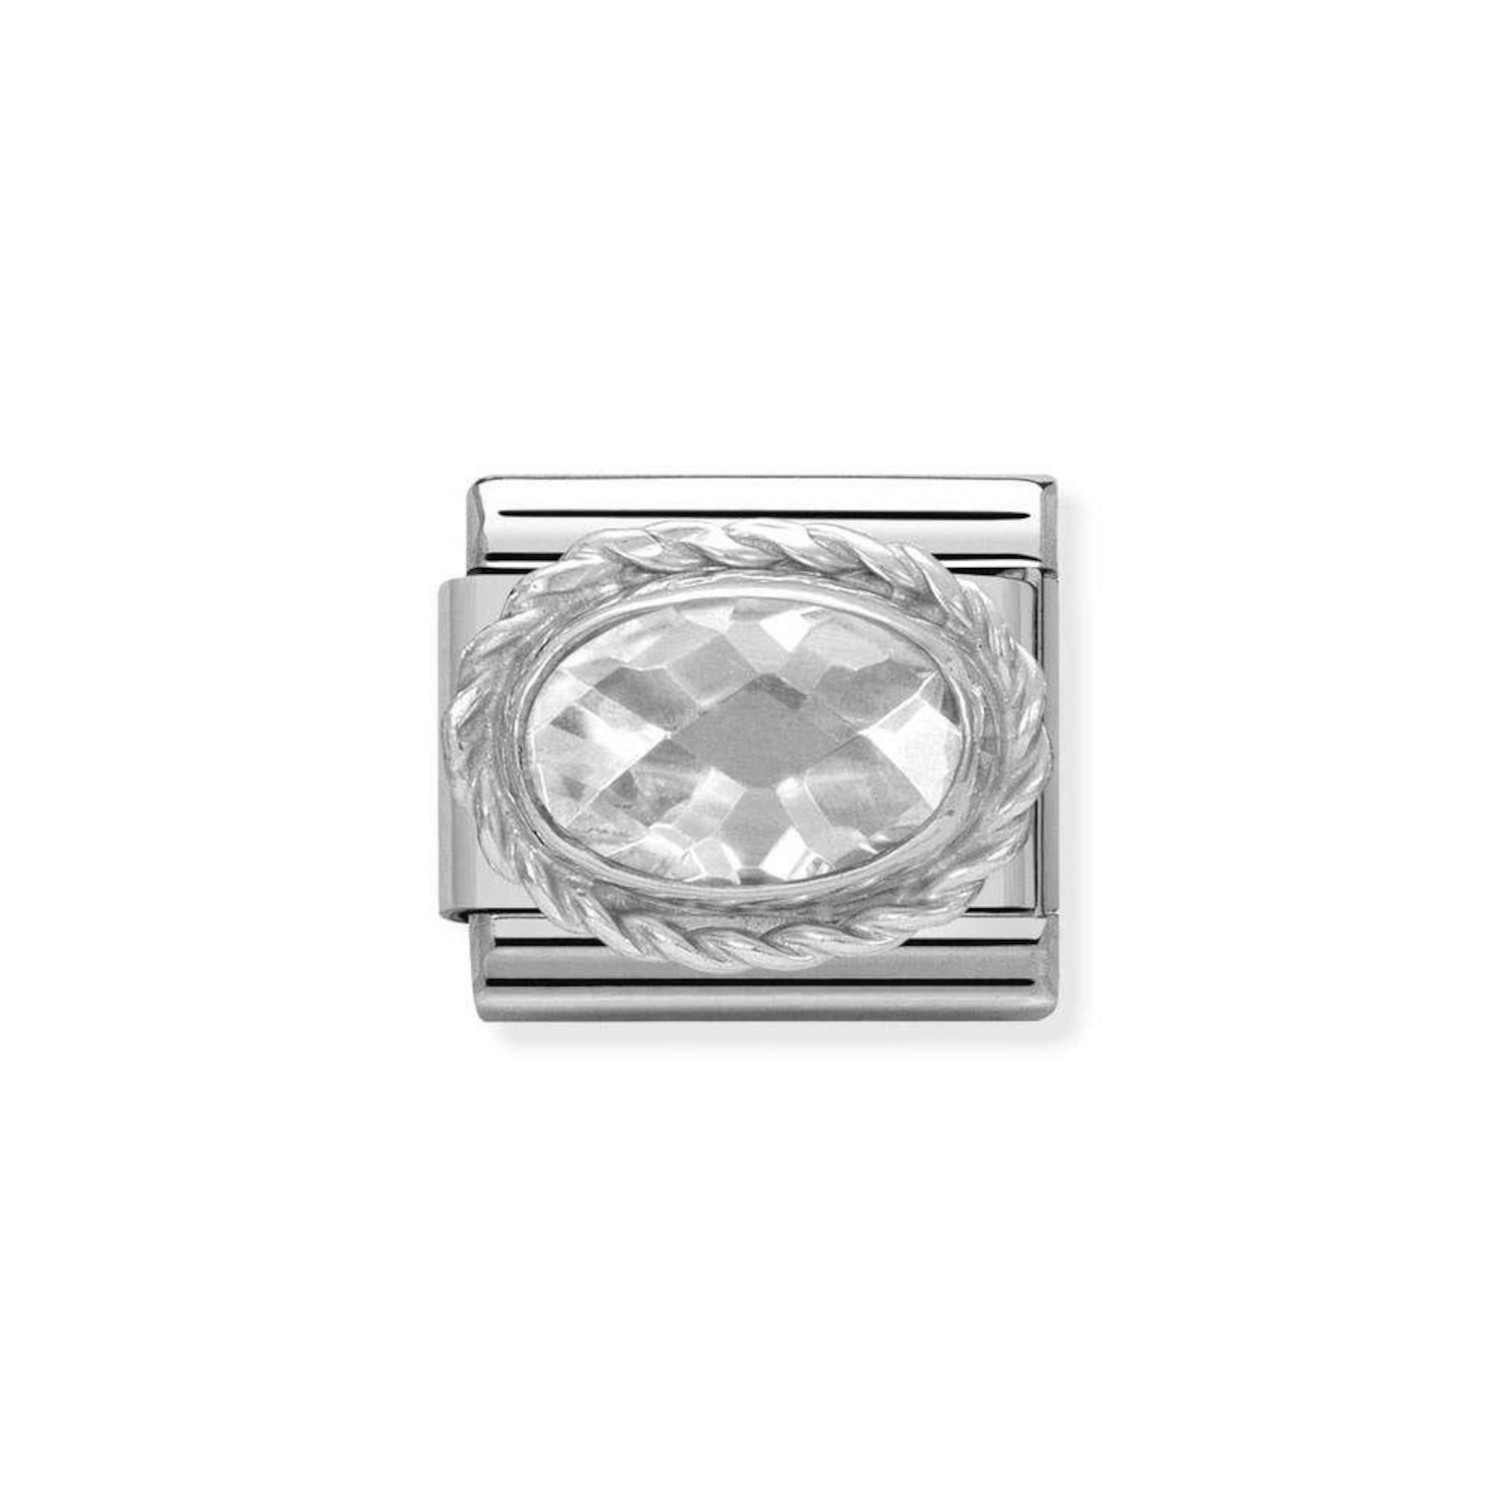 NOMINATION COMPOSABLE CLASSIC LINK IN STERLING SILVER WITH FACETED WHITE STONE 330604/010